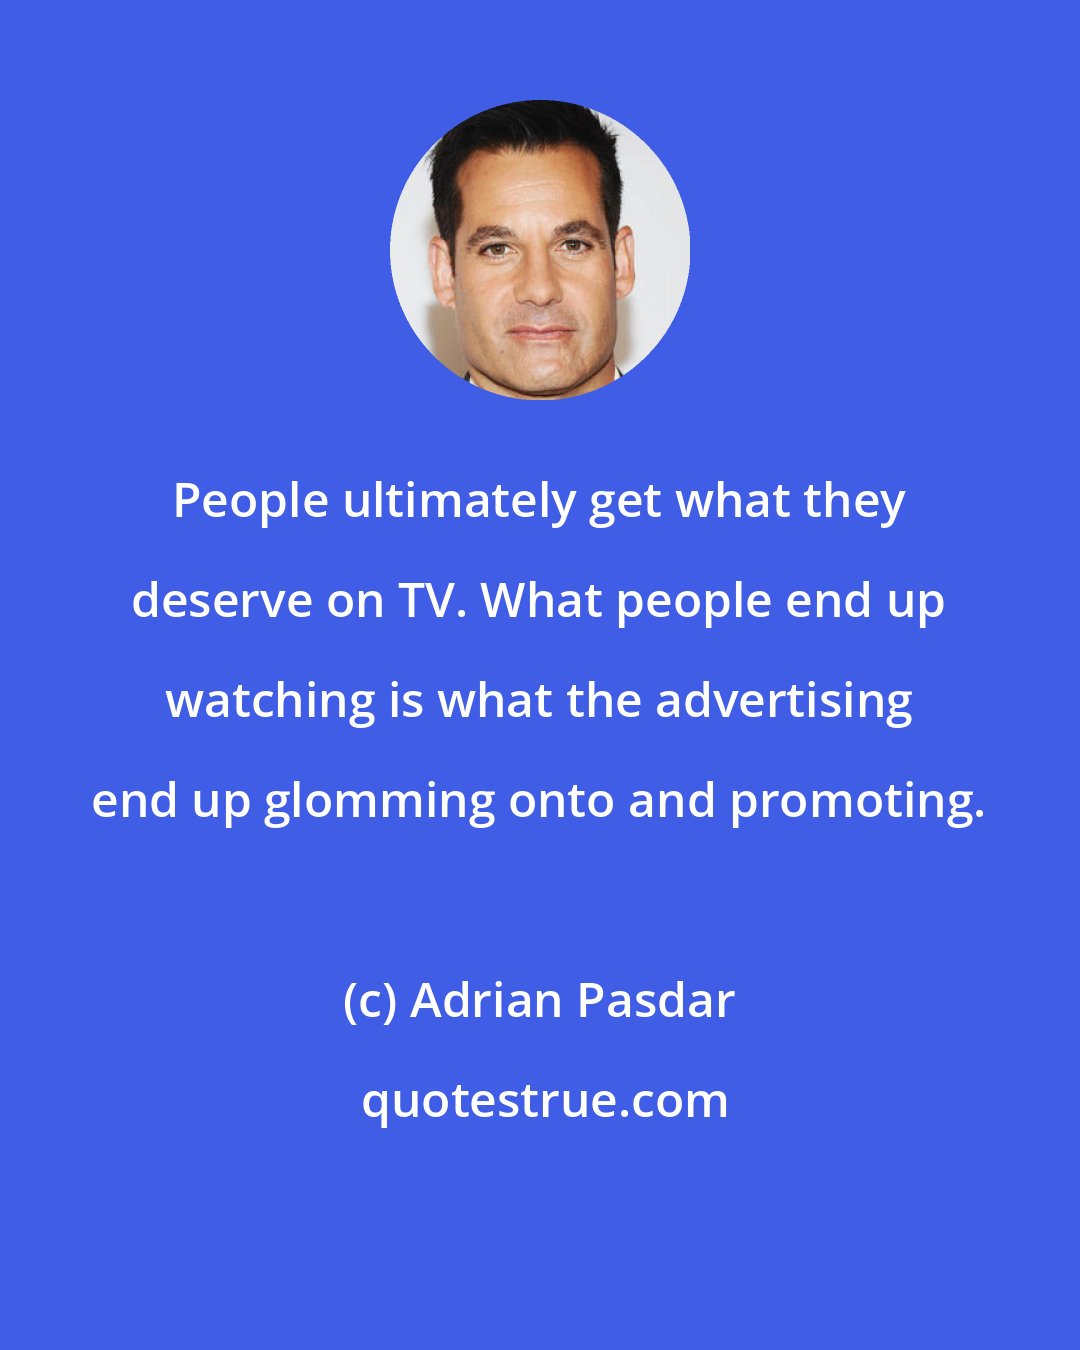 Adrian Pasdar: People ultimately get what they deserve on TV. What people end up watching is what the advertising end up glomming onto and promoting.